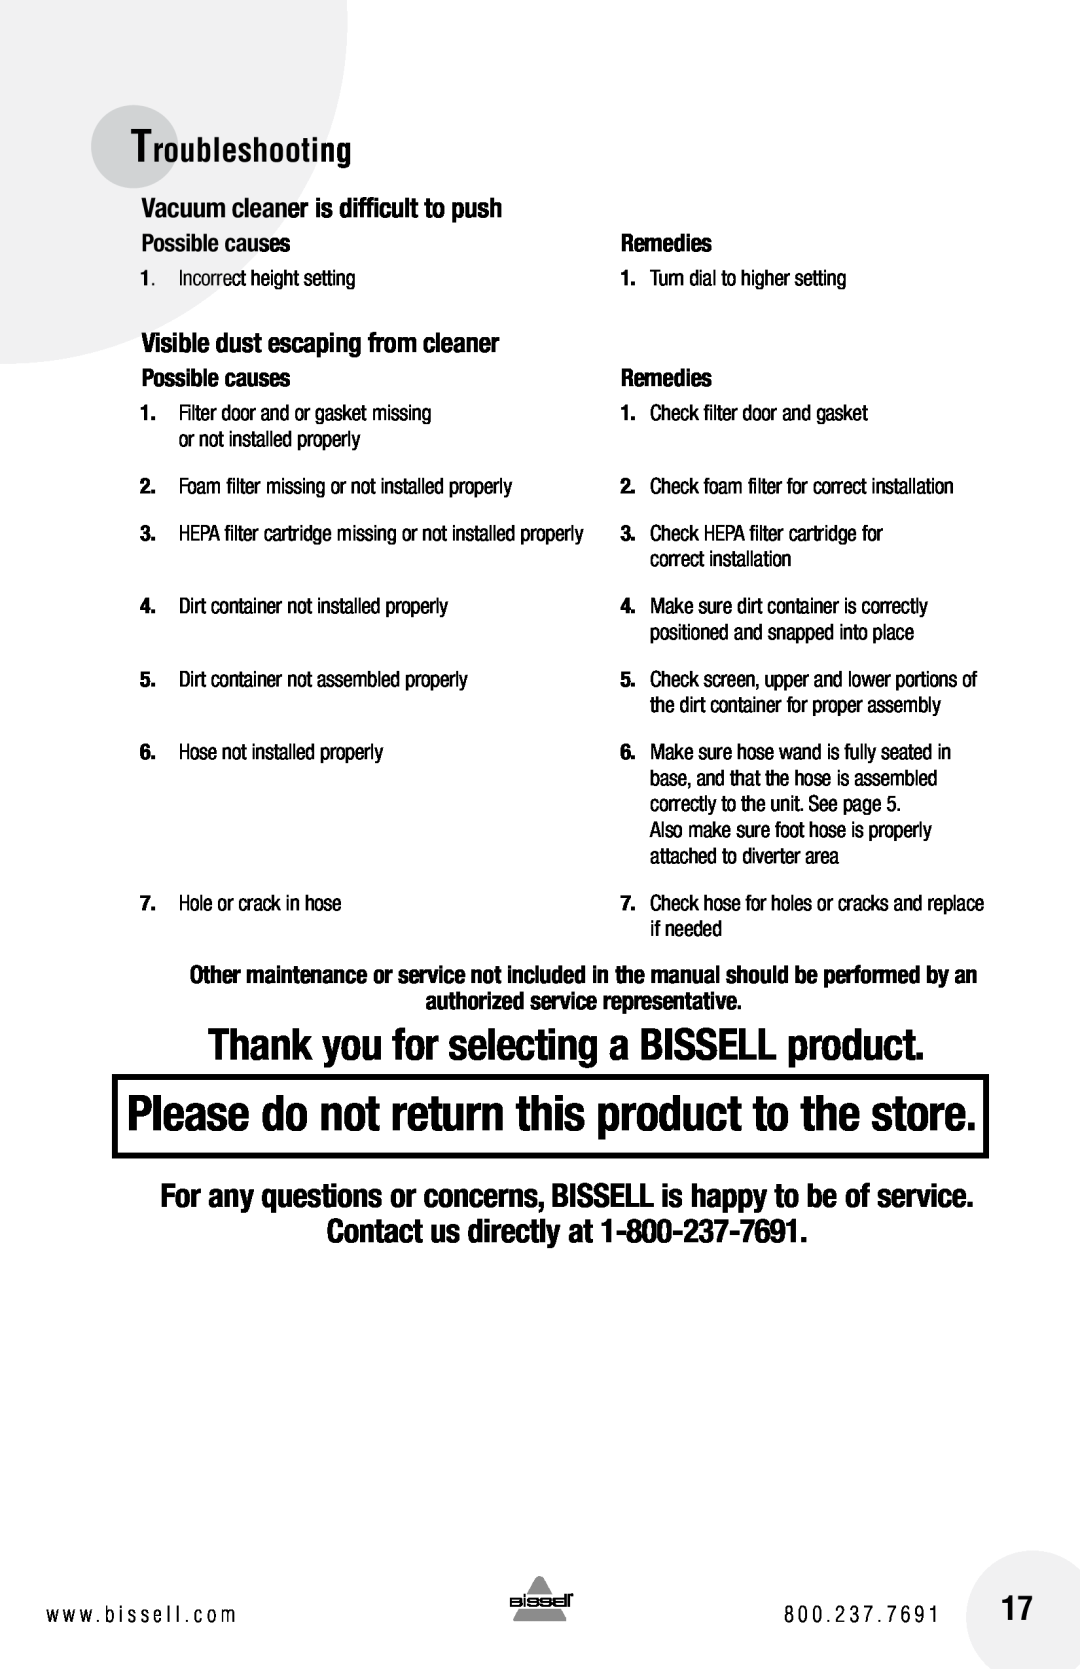 Bissell 16N5 Thank you for selecting a BISSELL product, Contact us directly at, Vacuum cleaner is difficult to push 